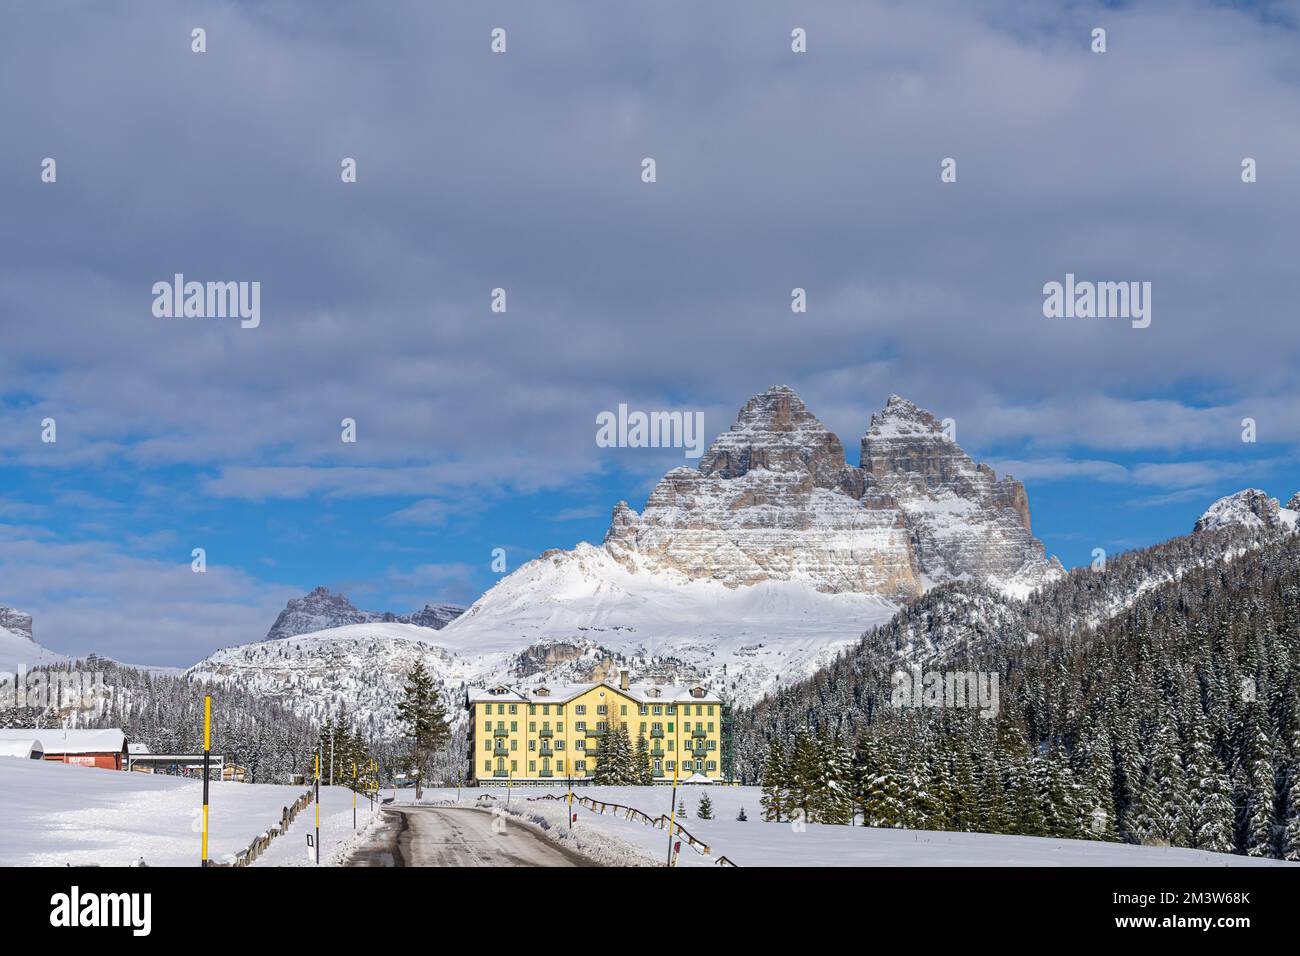 panoramic view of the frozen Misurina lake, in the Dolomites mountains, Italy, in winter Stock Photo